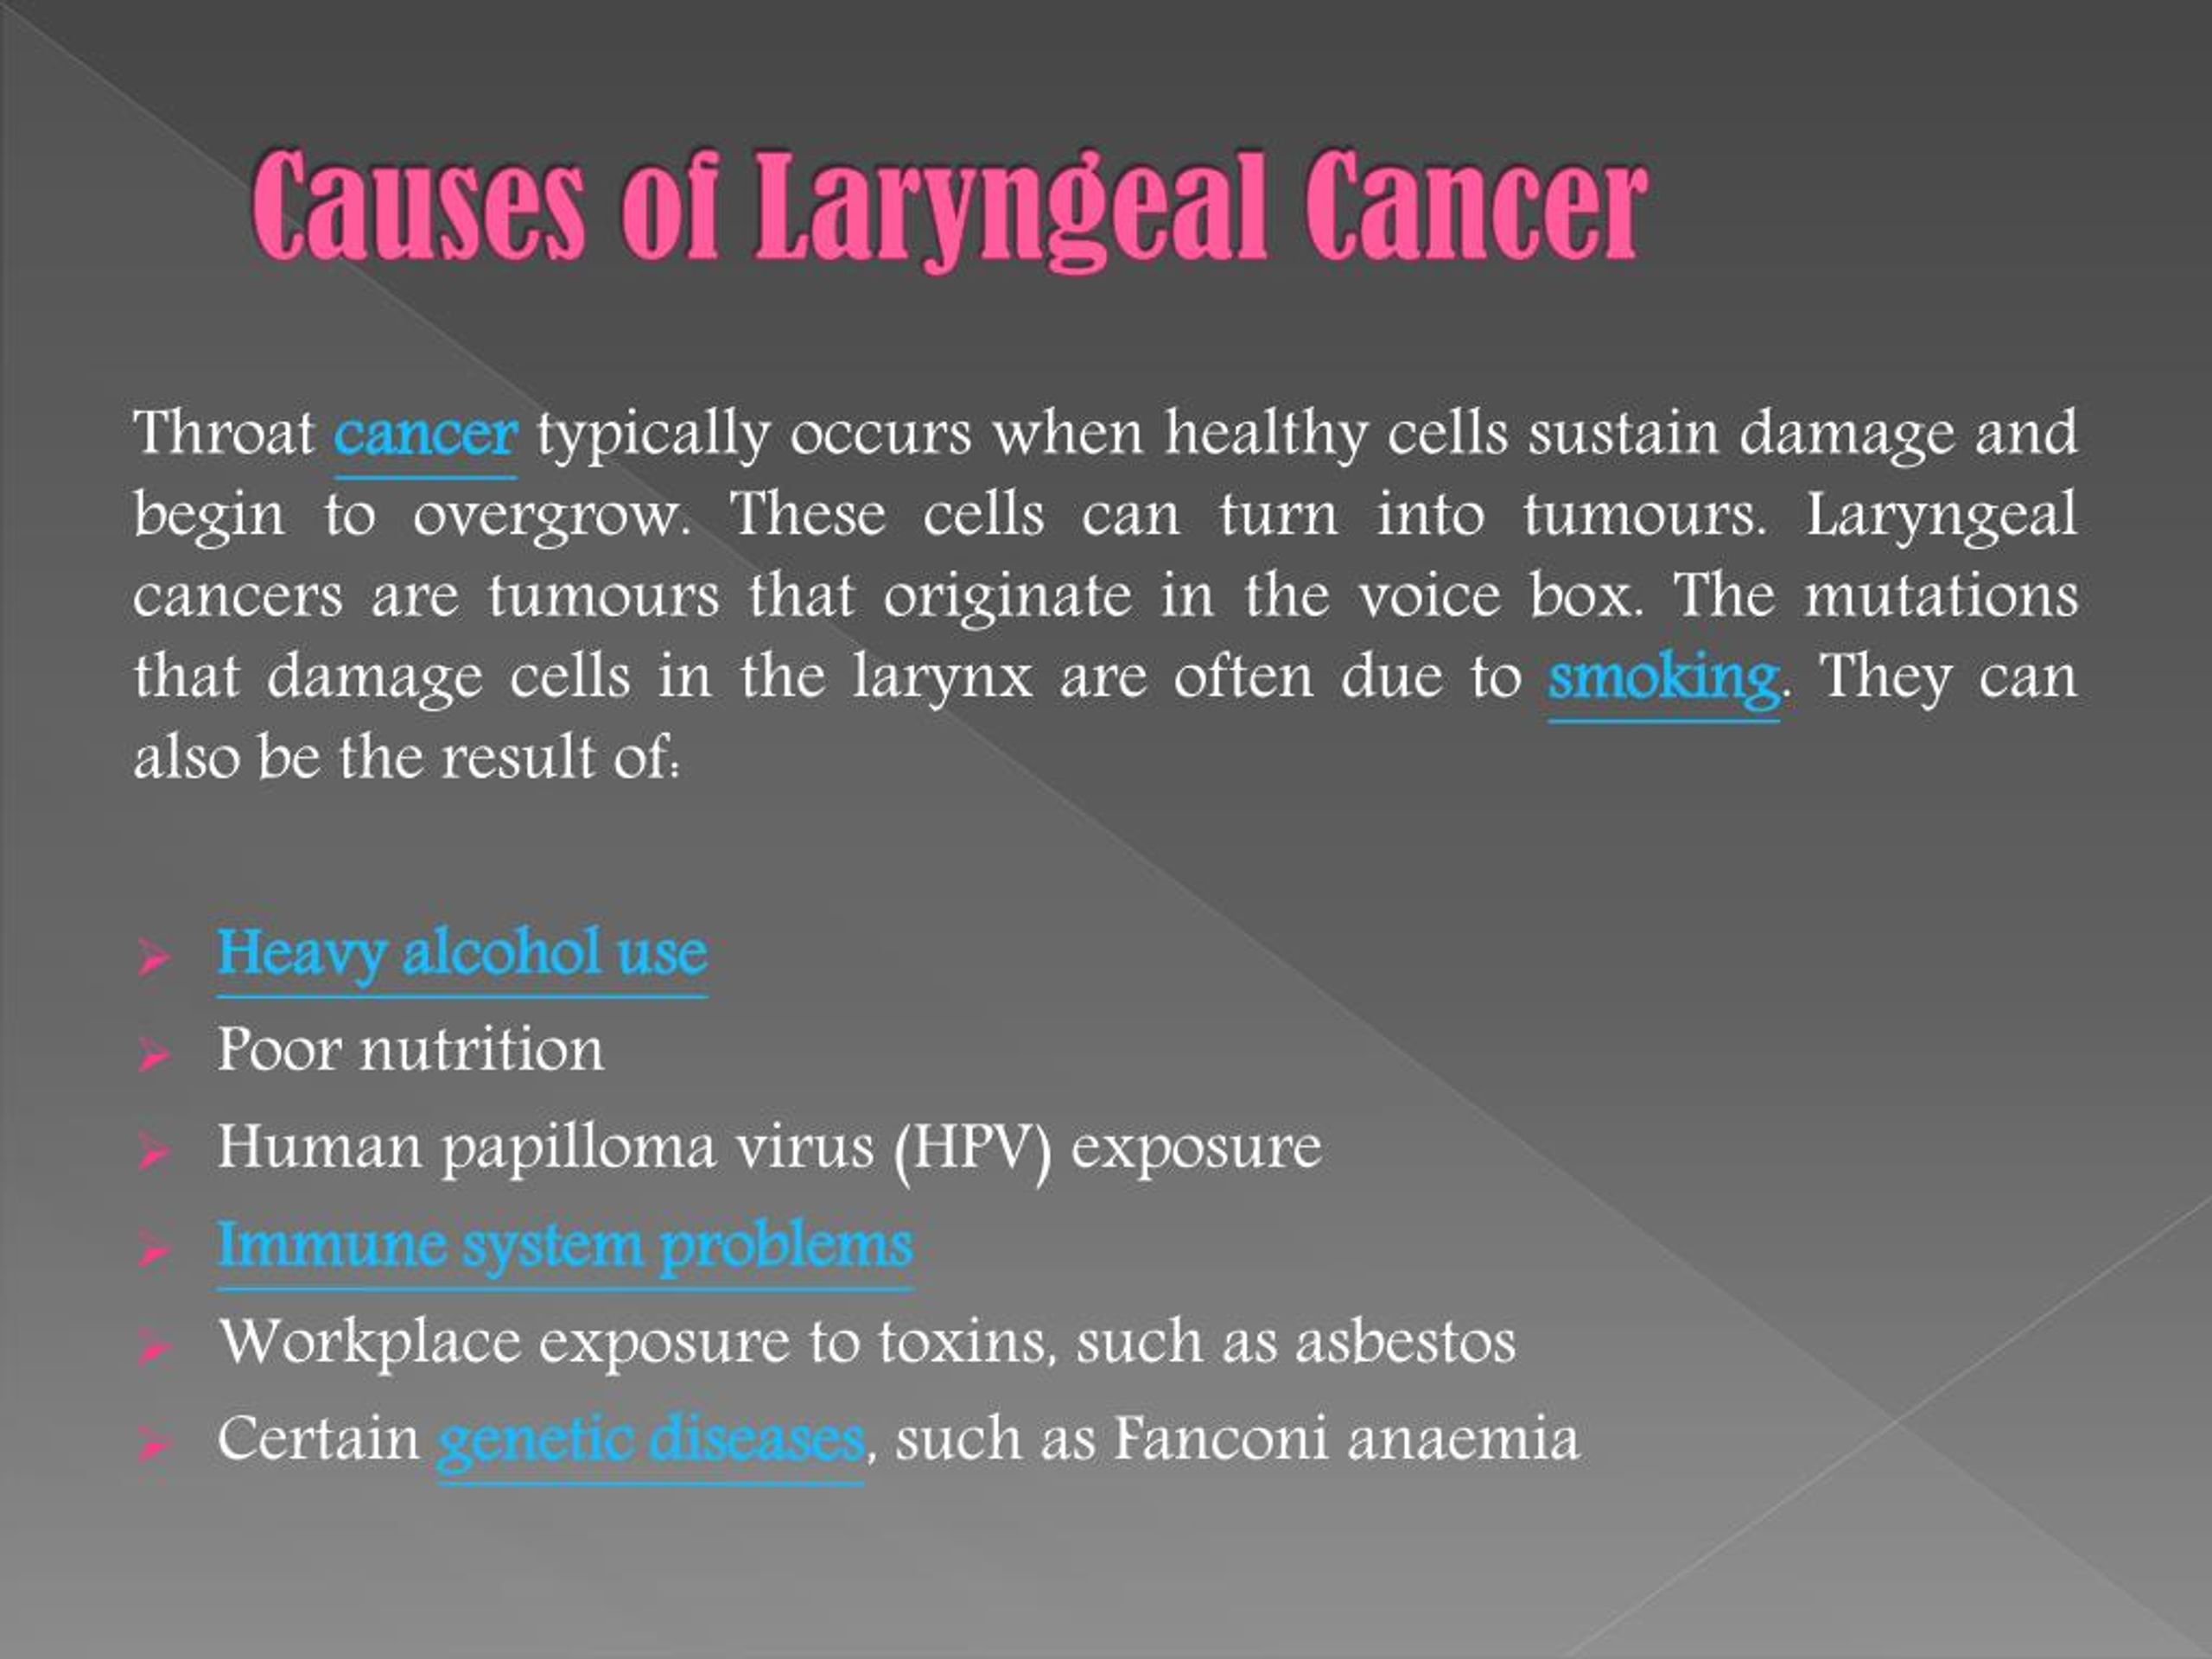 Ppt Laryngeal Cancer Symptoms Causes Diagnosis And Treatment Powerpoint Presentation Id 1956